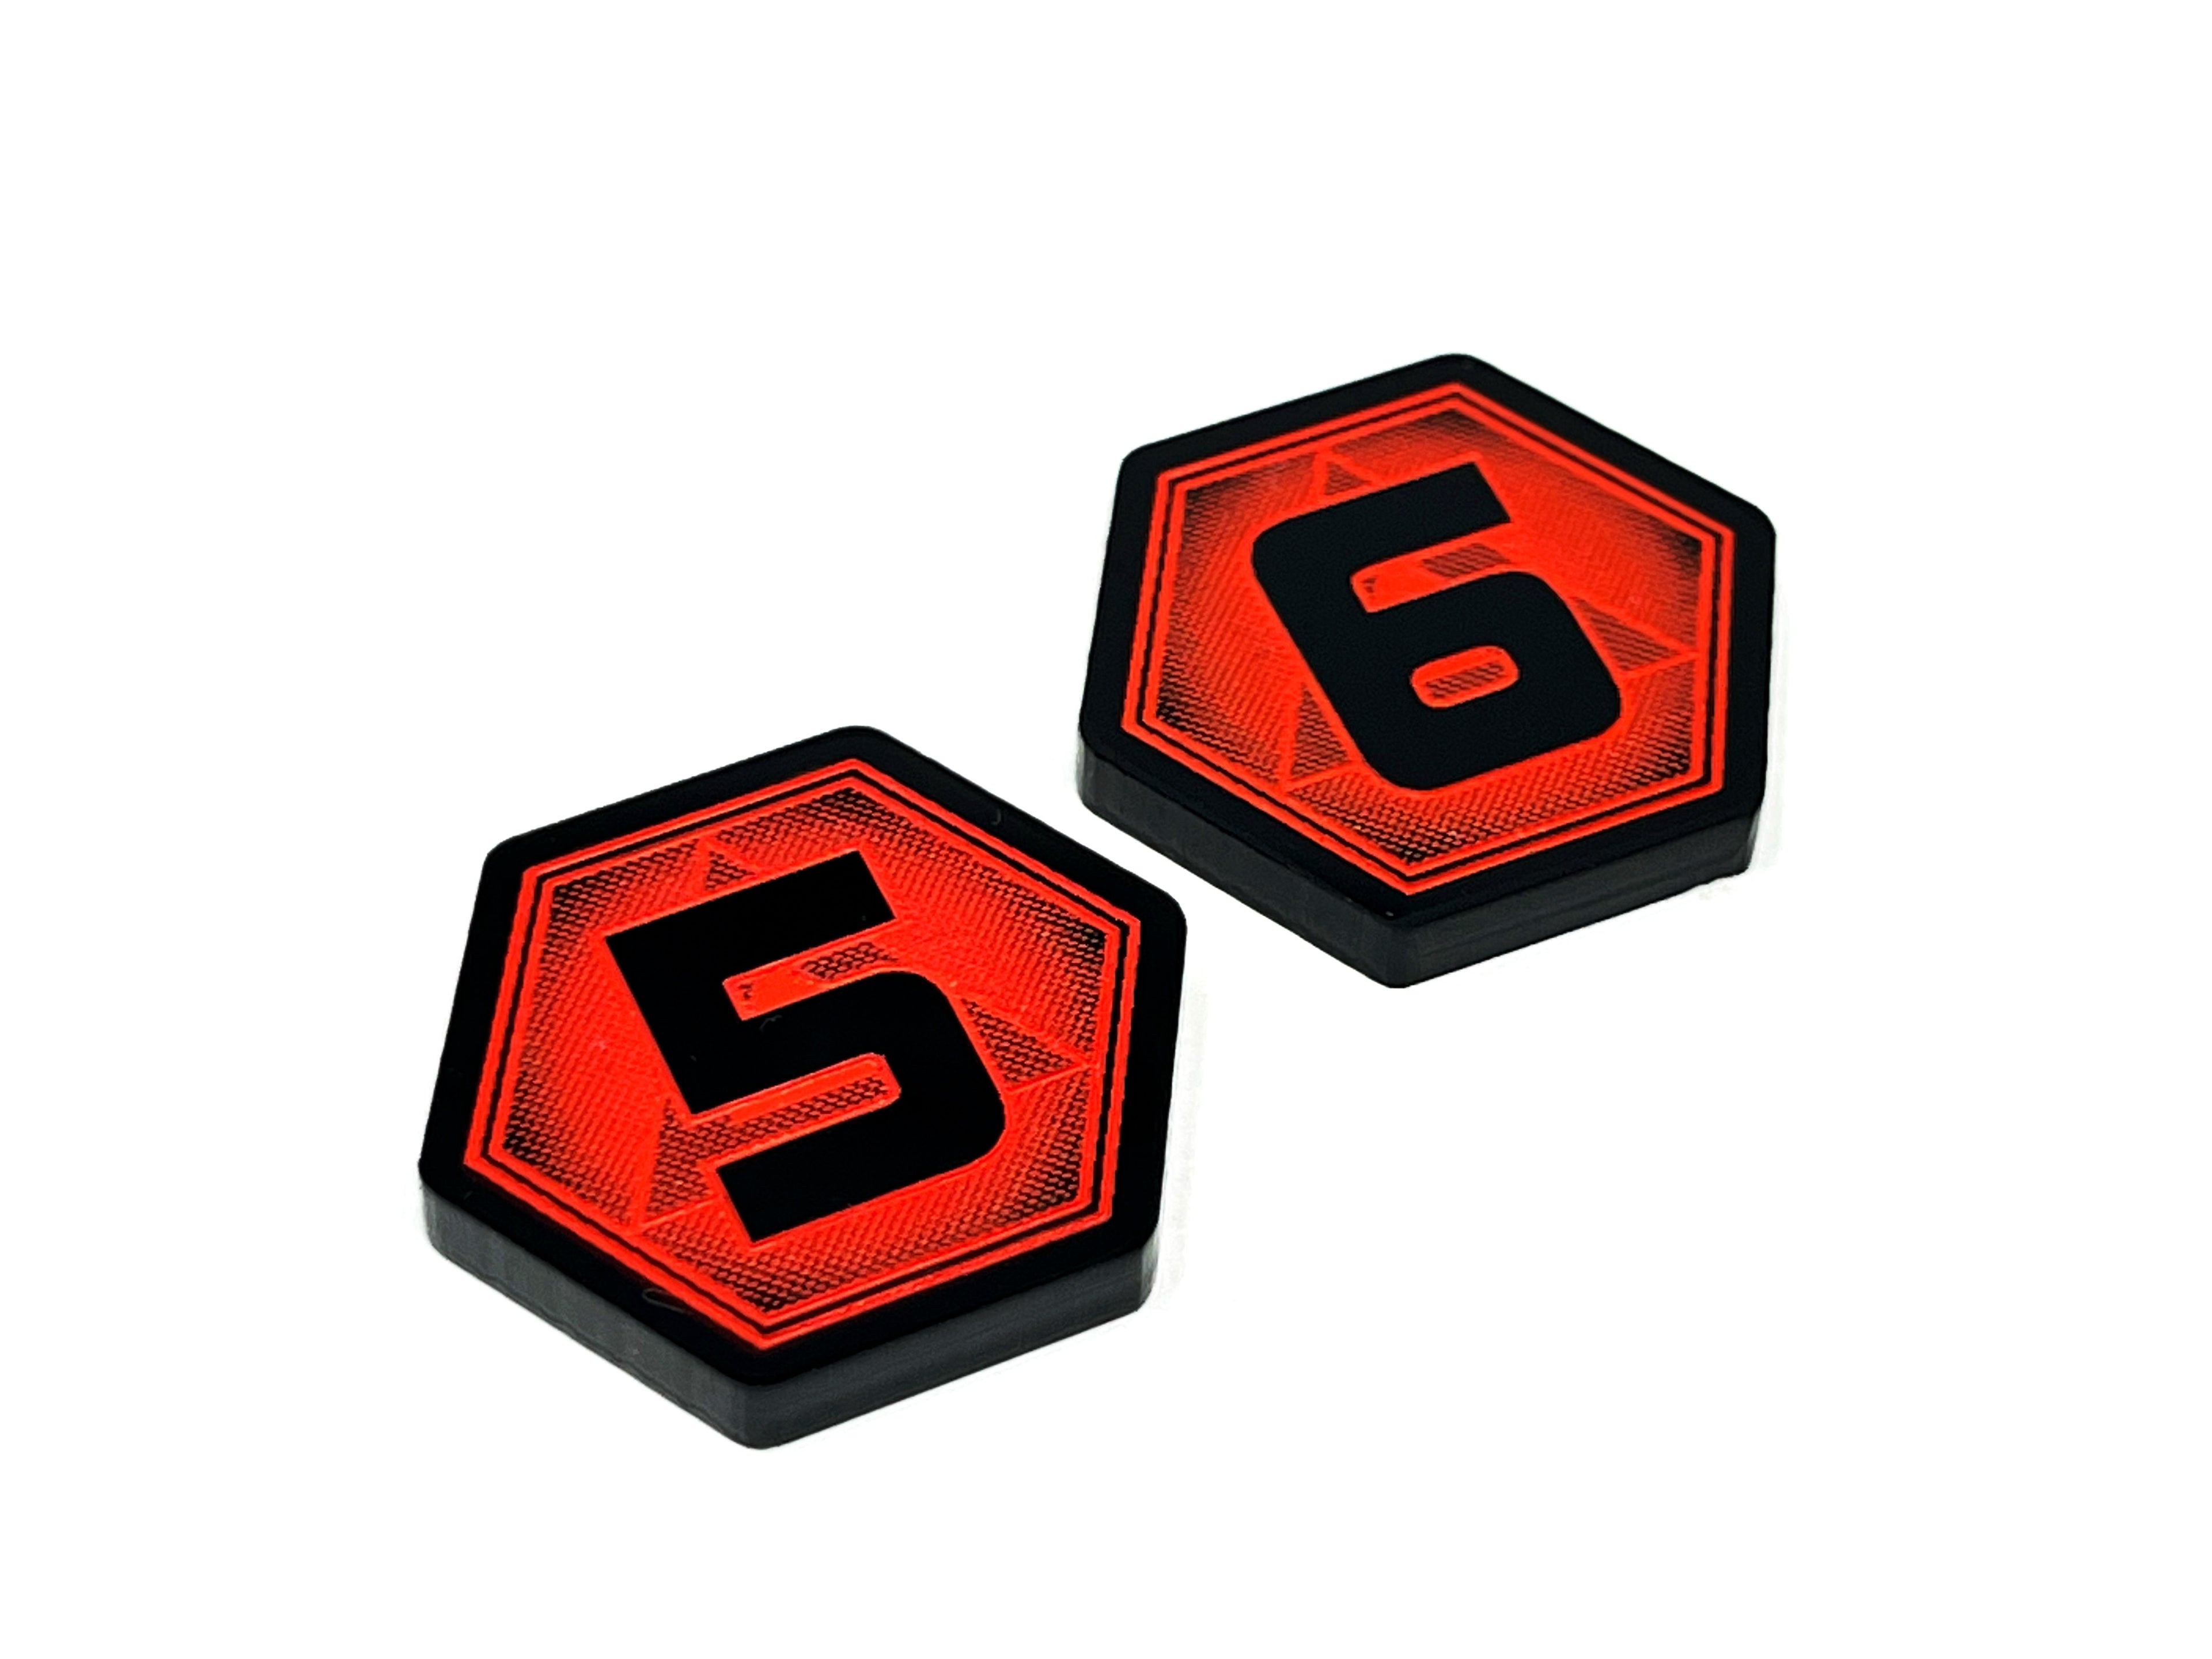 2 x 5/6 Damage Tokens for Star Wars Shatterpoint (Double Sided)